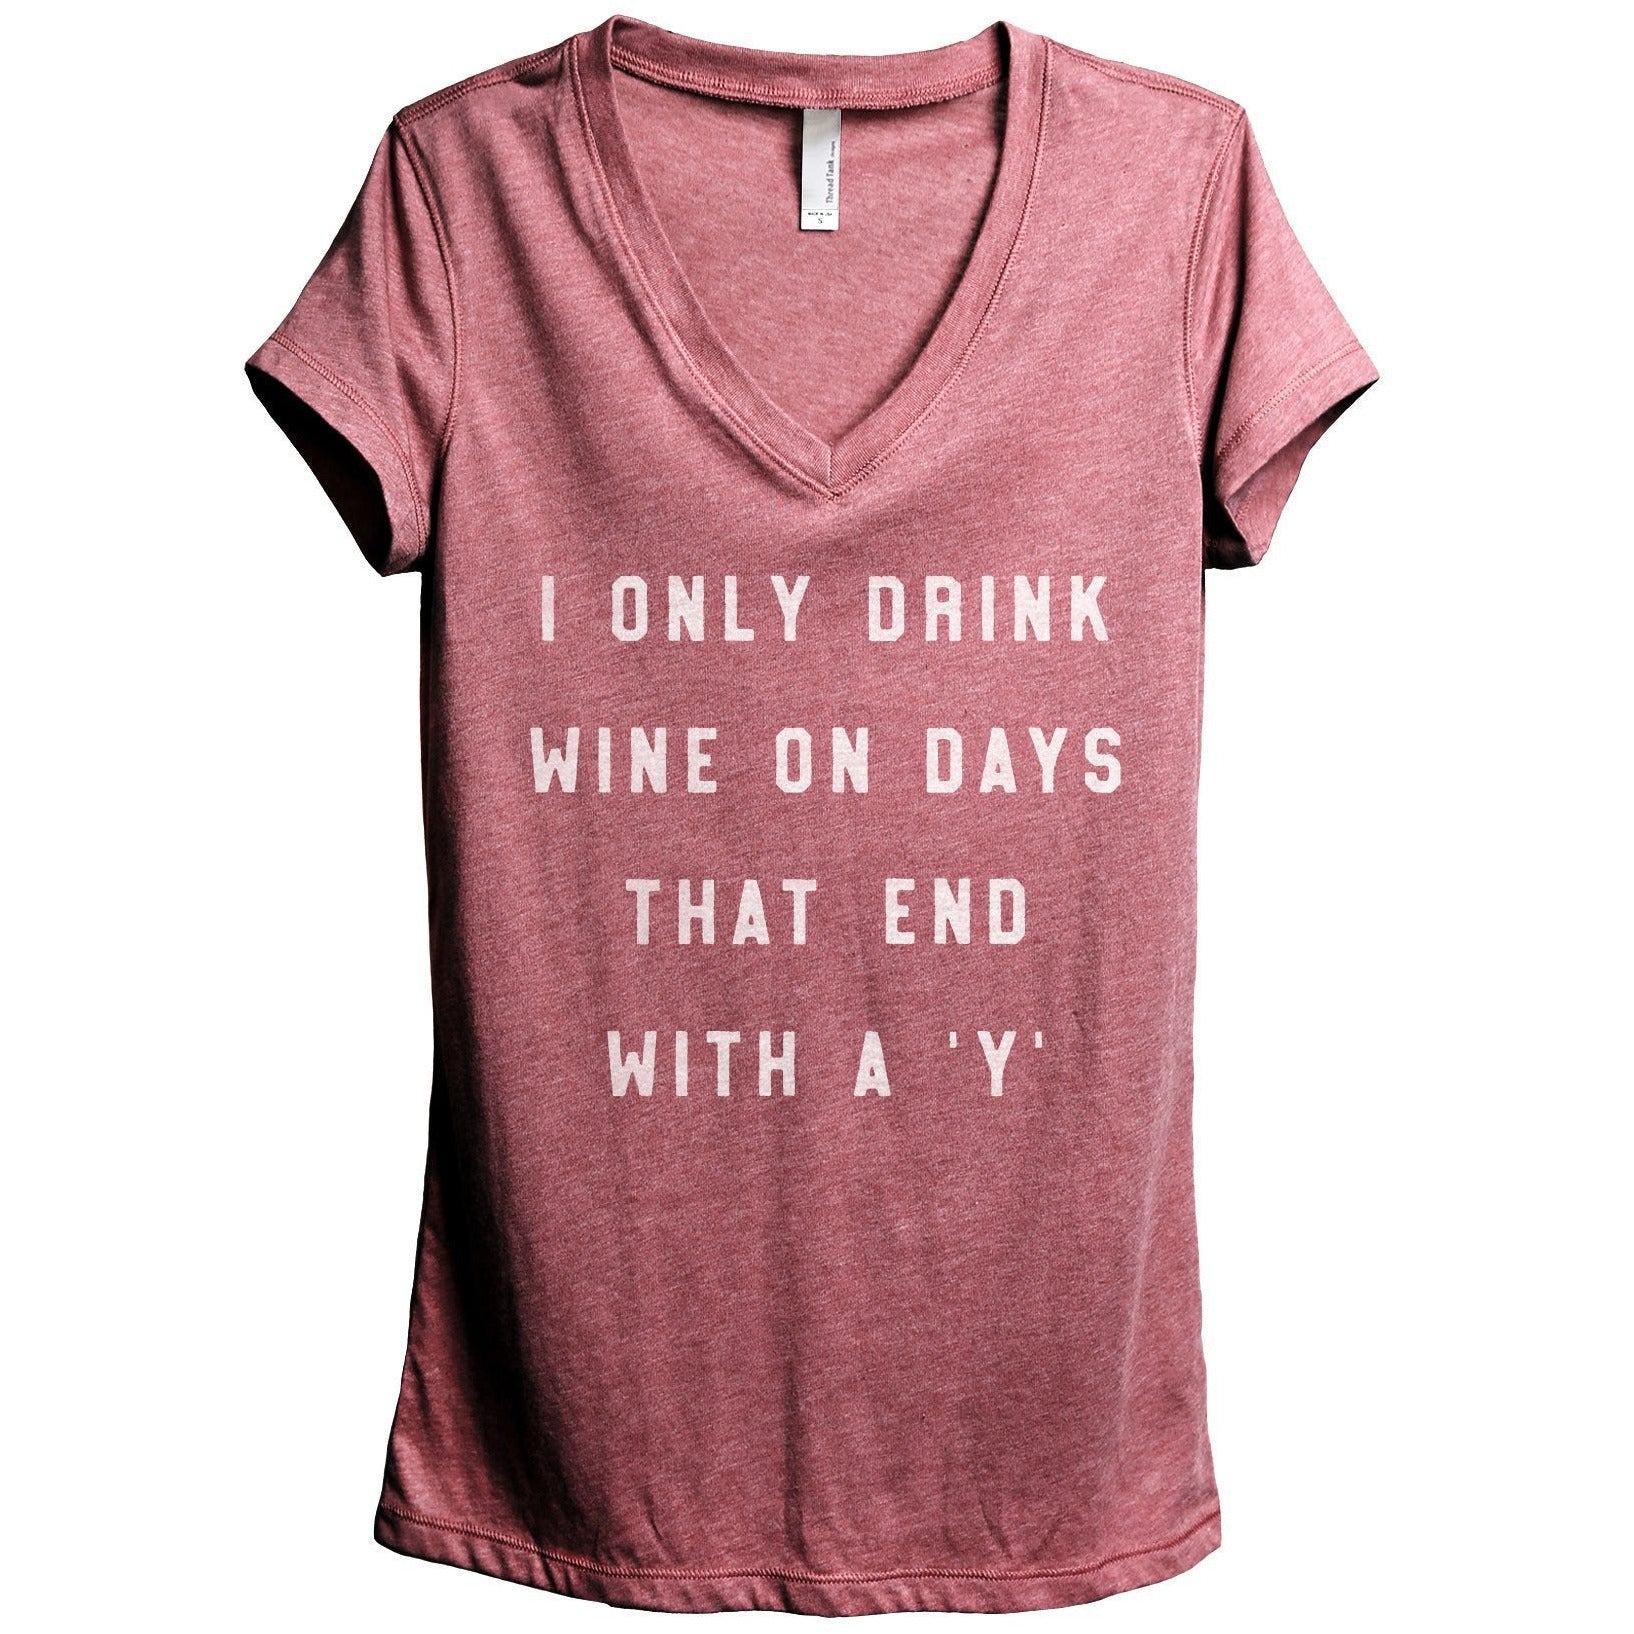 Drink Wine On Days Ends With Y Women's Relaxed Crewneck T-Shirt Top Tee Heather Rouge
